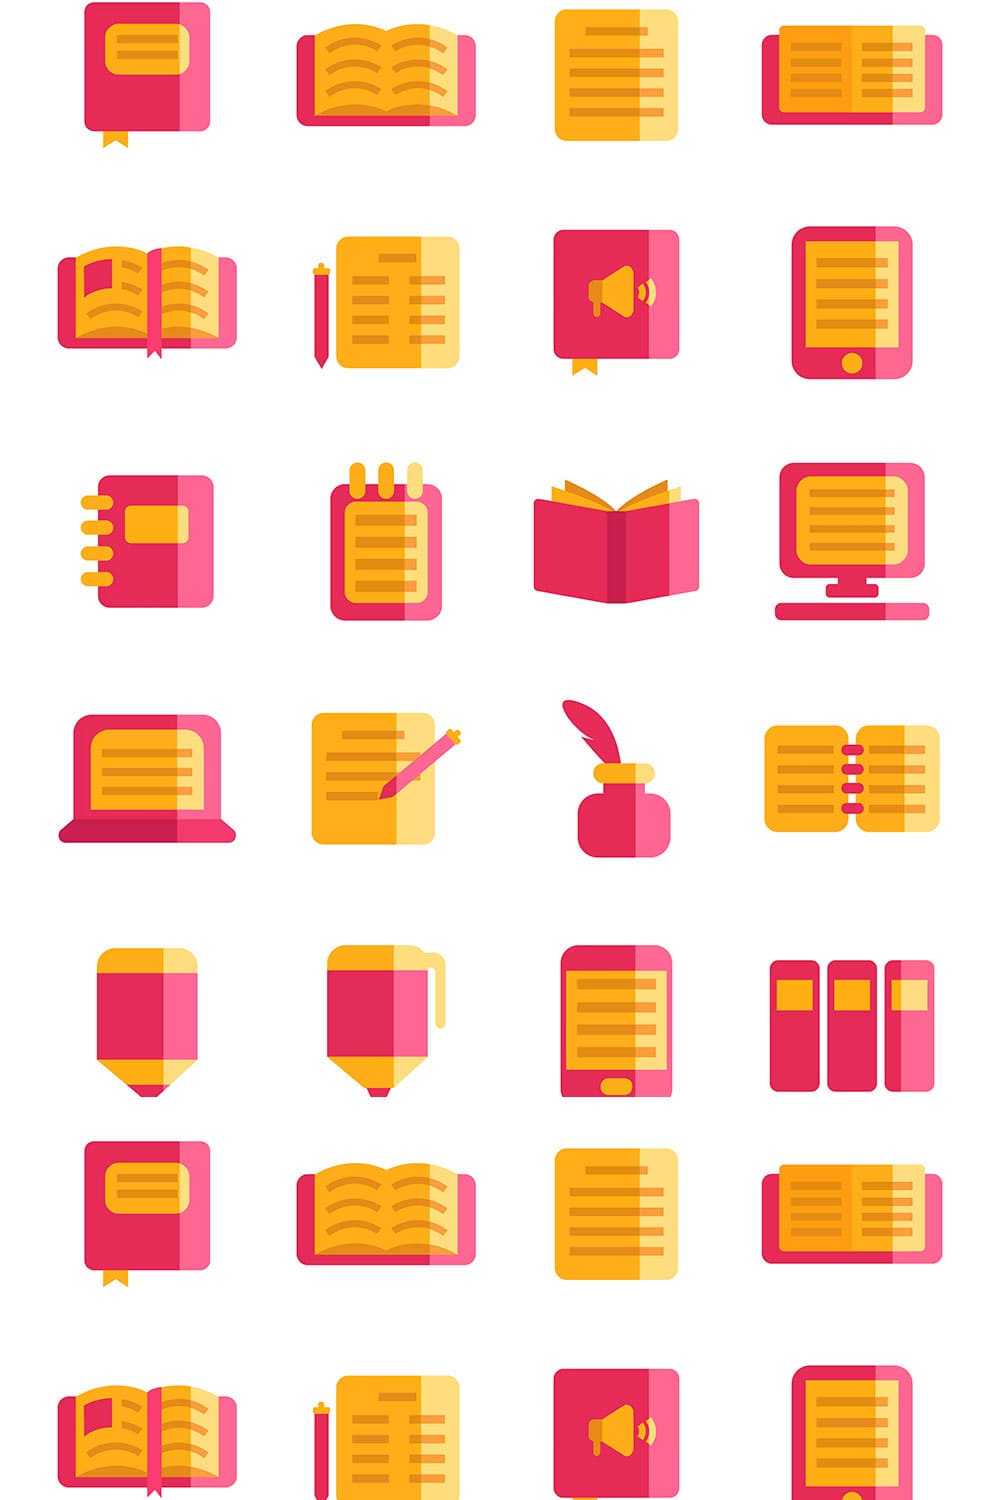 Literature icons set, picture for pinterest.